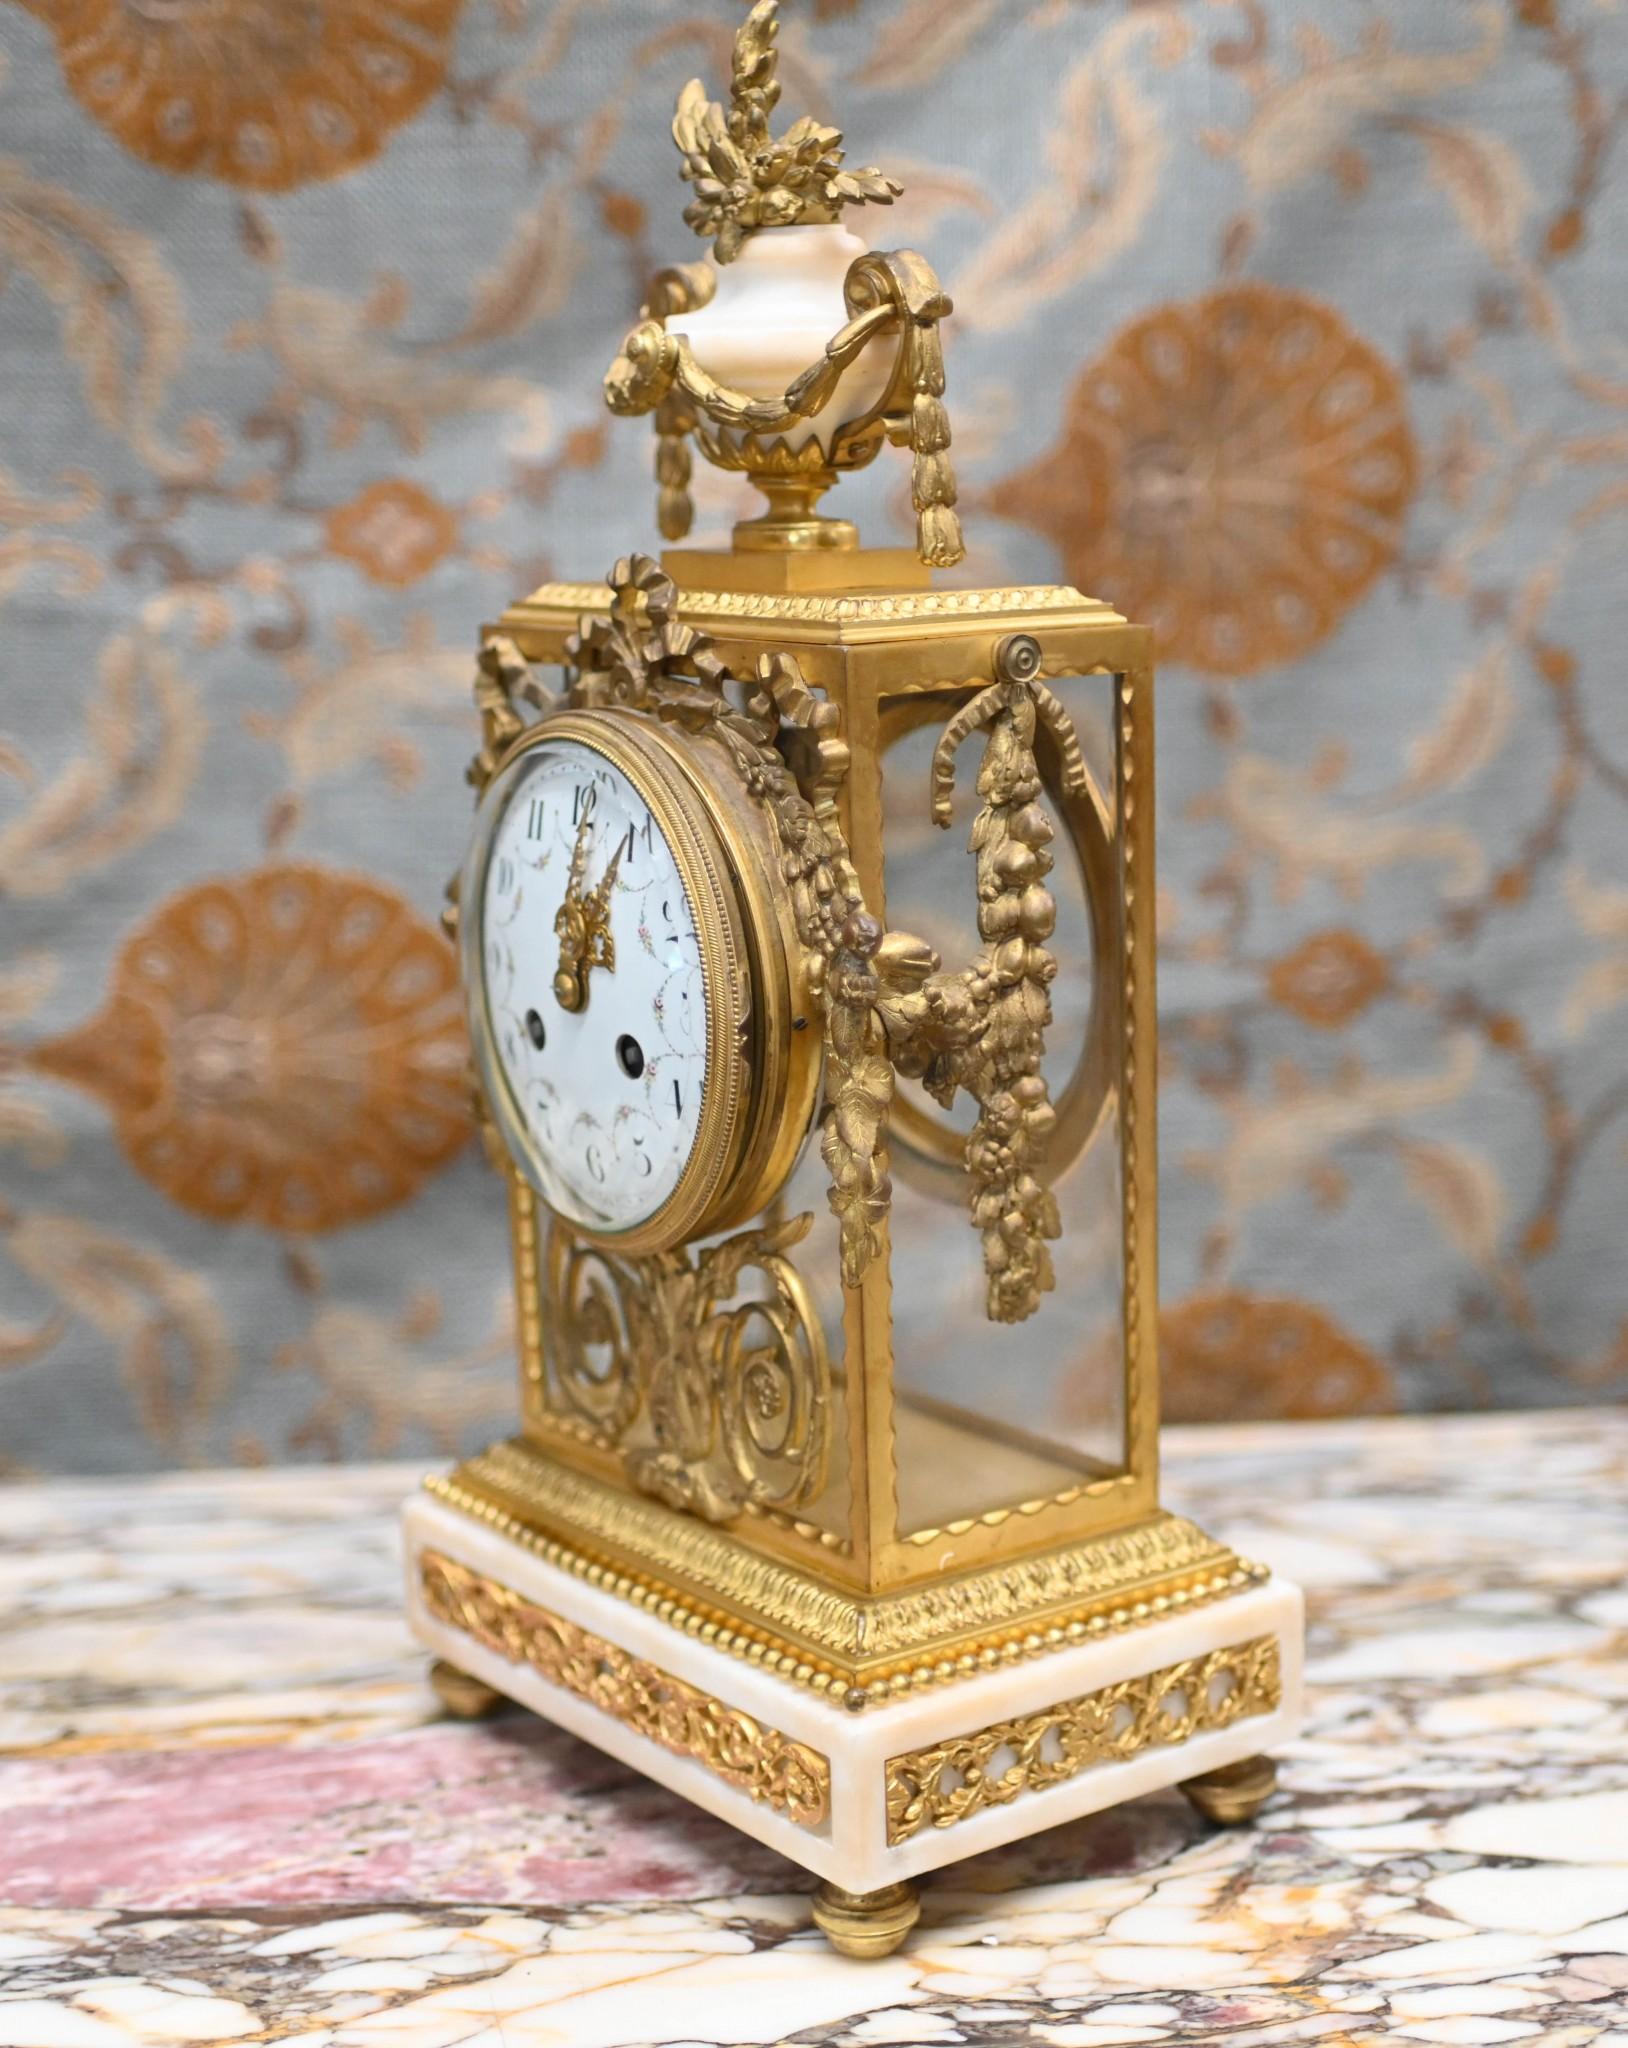 Wonderful French antique clock set with garniture
Classic mantle clock crafted from gilt and marble
The clock has a chiming mechanism which chimes on the hour 
Hopefully the photos illustrate the details to the gilt very ornate and well cast
Clock